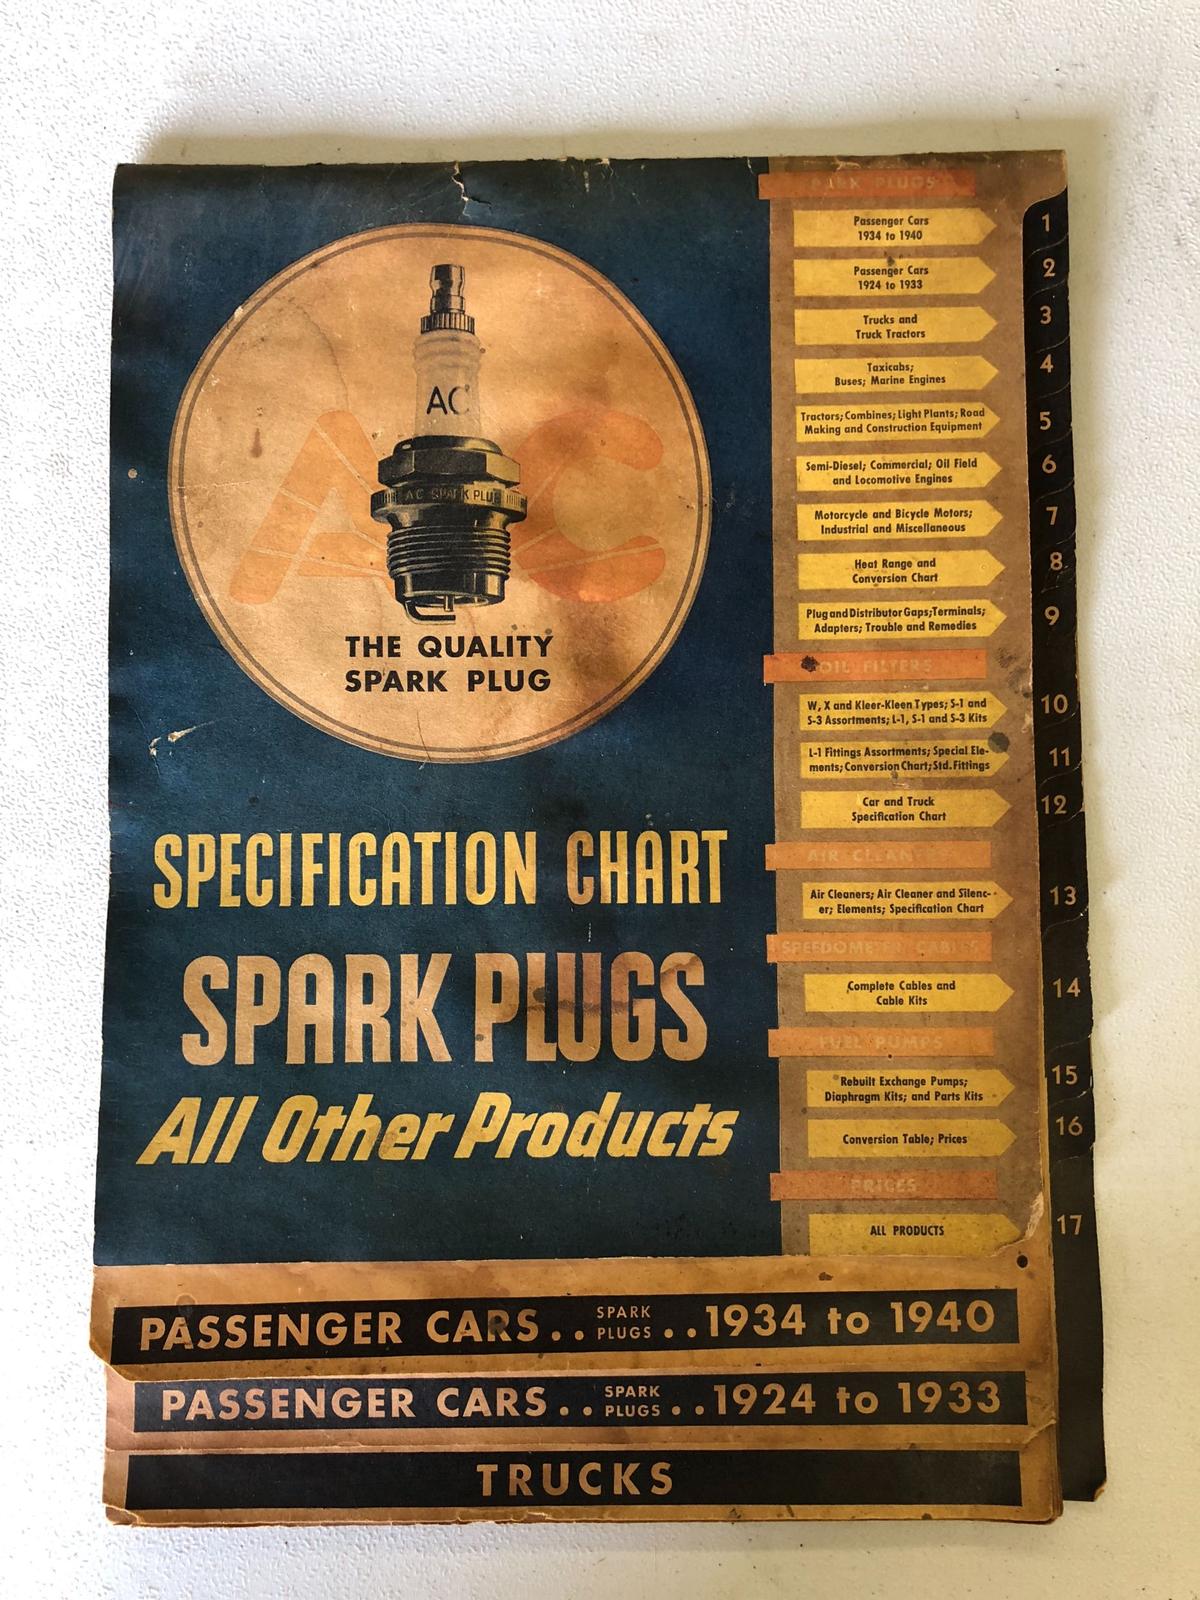 AC Spark Plug and otyher Products Poster Specs